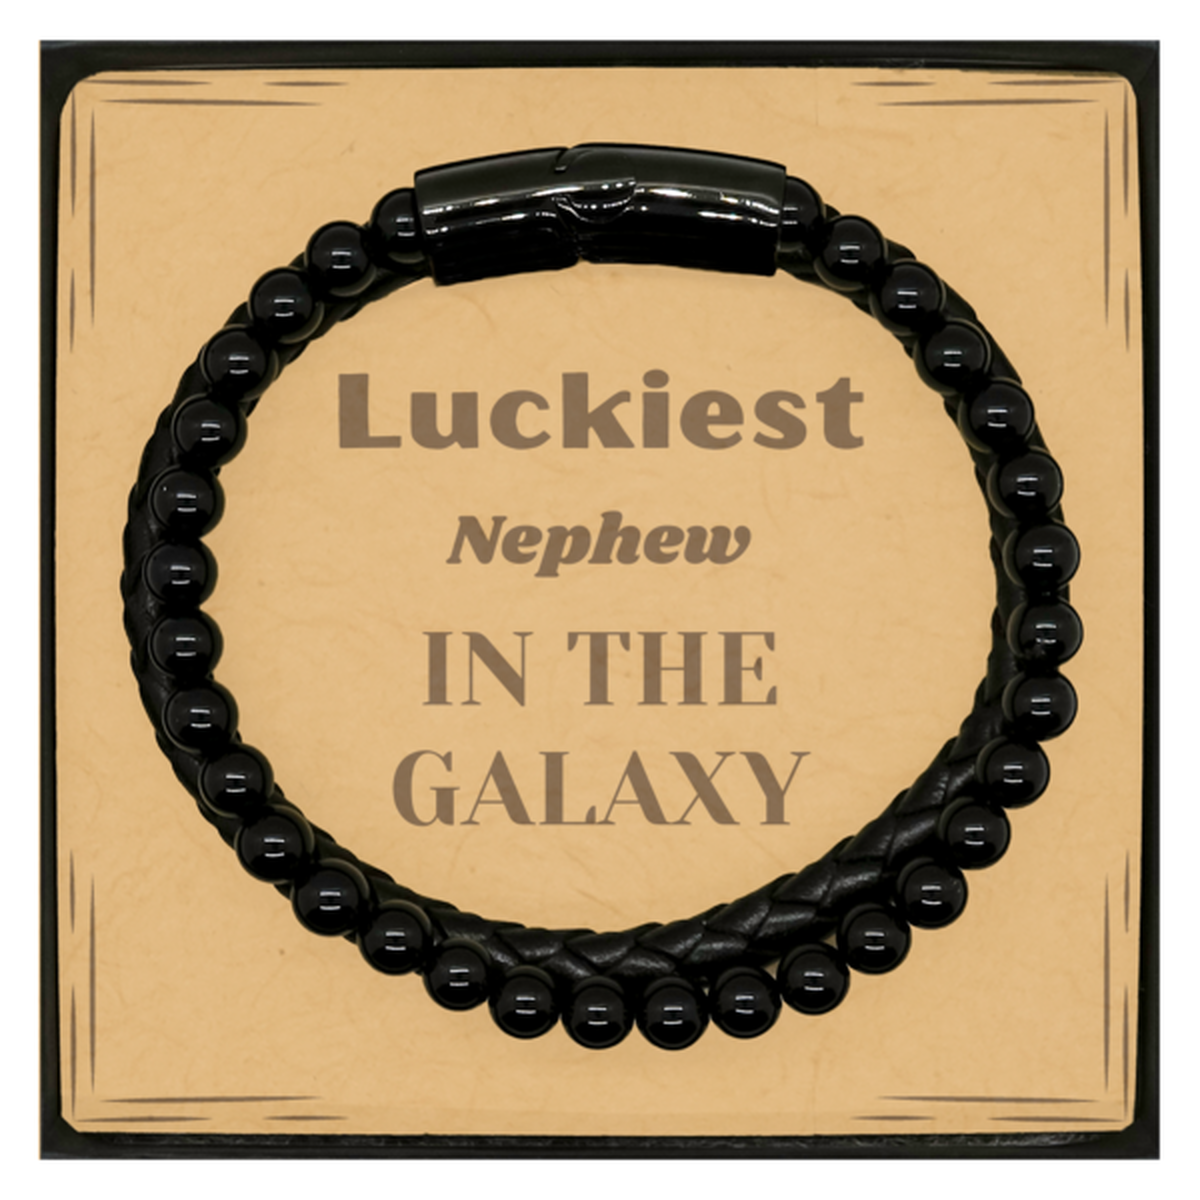 Luckiest Nephew in the Galaxy, To My Nephew Message Card Gifts, Christmas Nephew Stone Leather Bracelets Gifts, X-mas Birthday Unique Gifts For Nephew Men Women